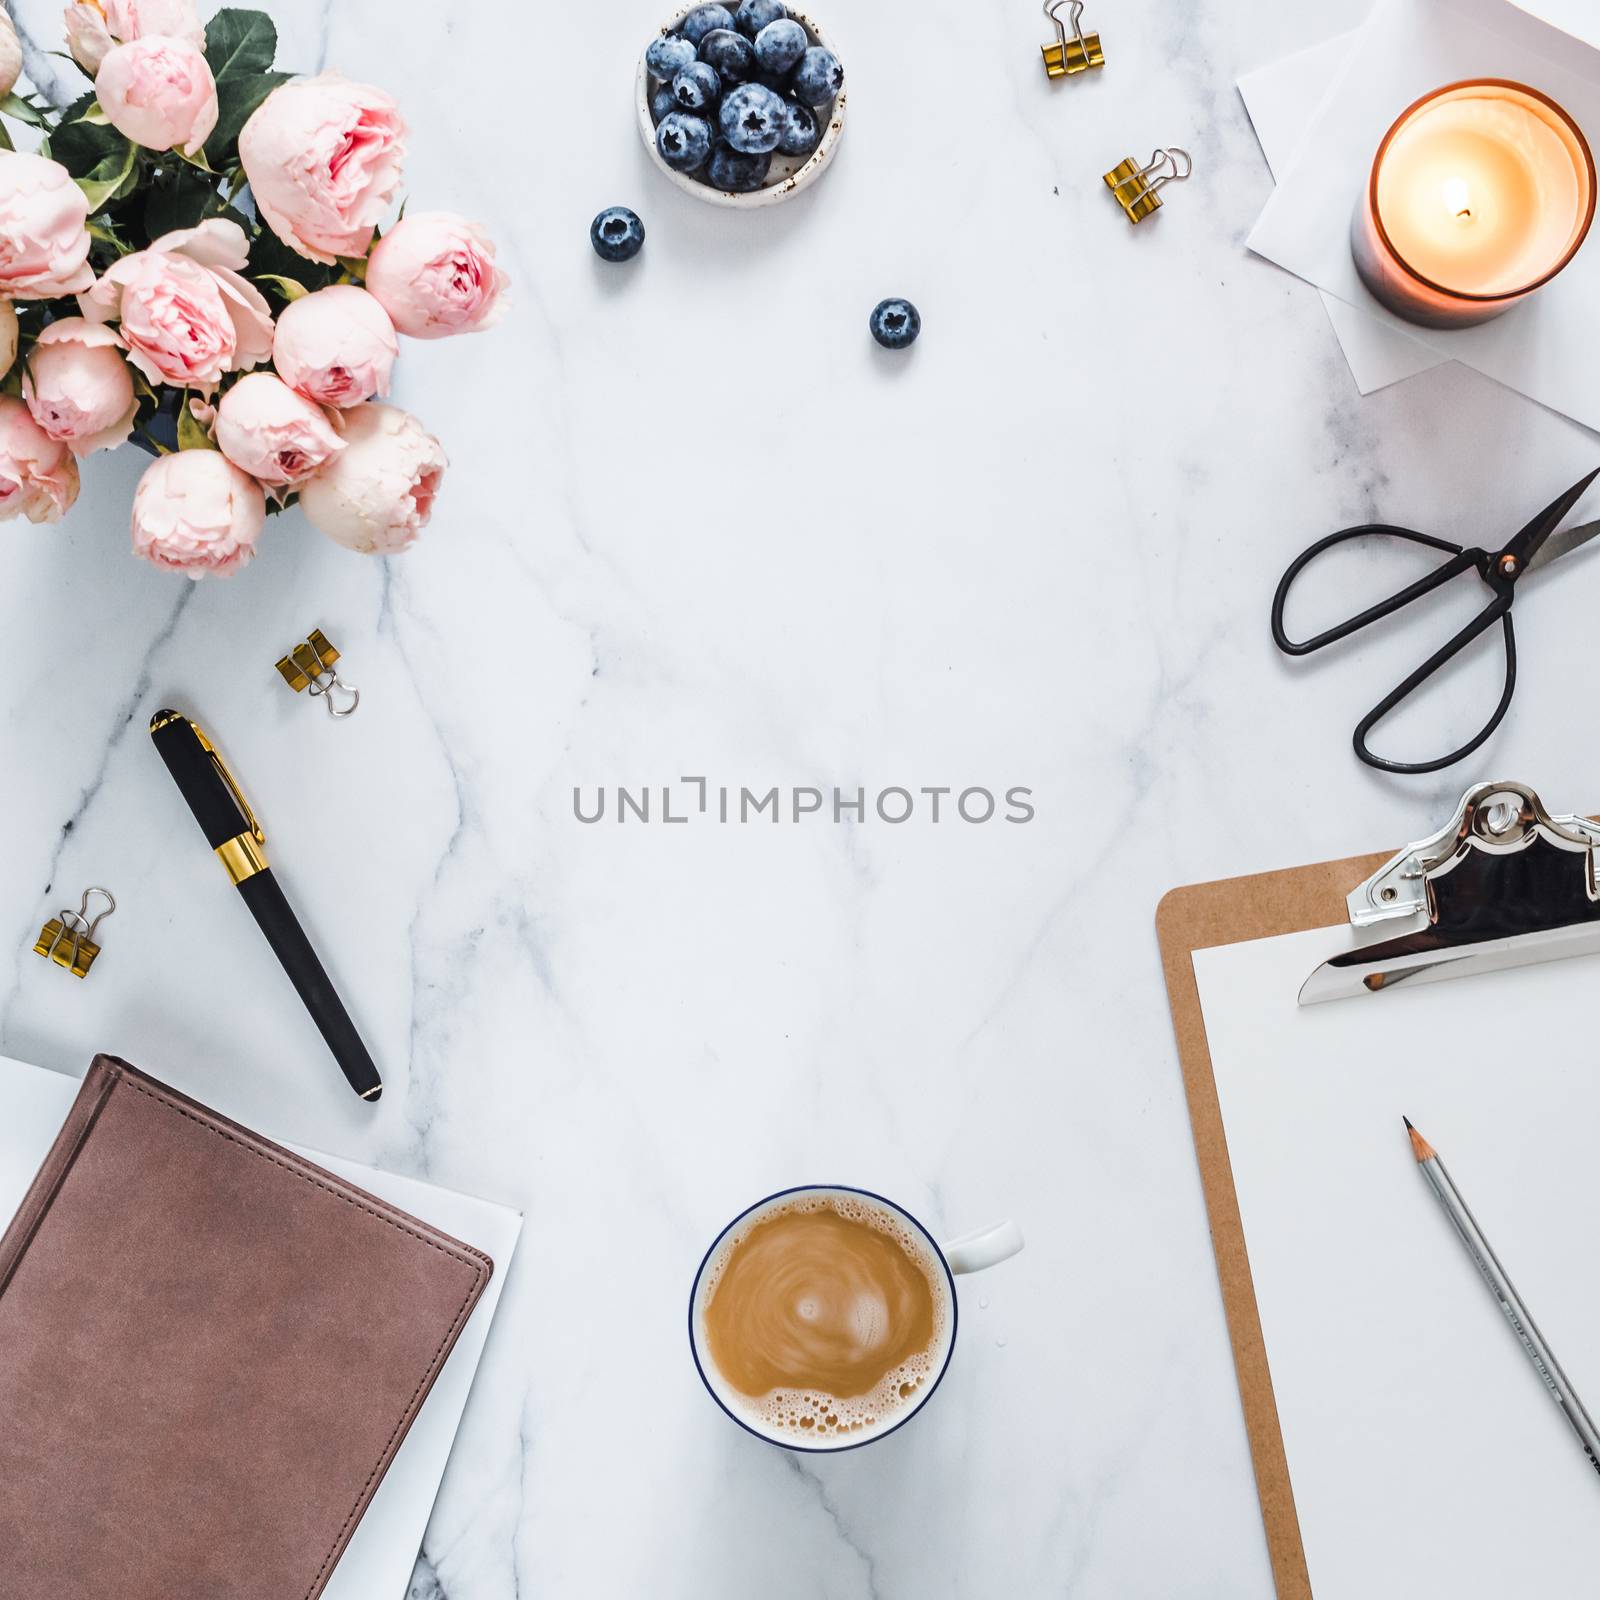 Top view of female home office with copy space in center. Clipboard, flowers, scented candle on white marble. Feminine home office mock up with copy space for text or design. Flat lay